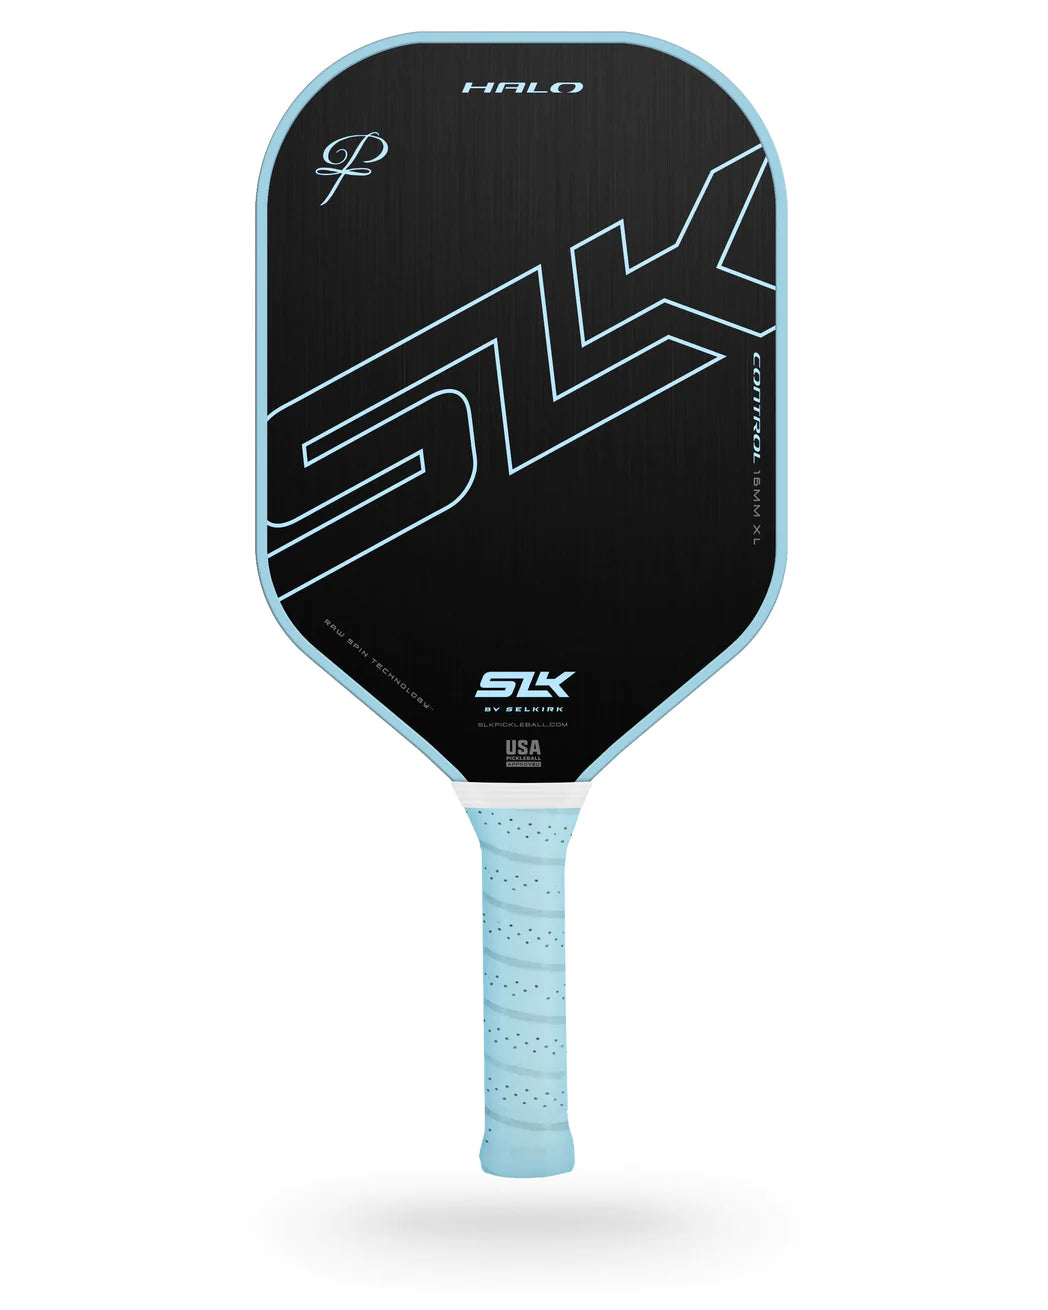 Selkirk_Halo_Signature_XL_Control_Parris_Todd_Pickleball_Pro_Player_Best_Paddle_Signature_Halo_16mm_Magasin_de_pickleball_Quebec_Canada_Pickleball_Store_